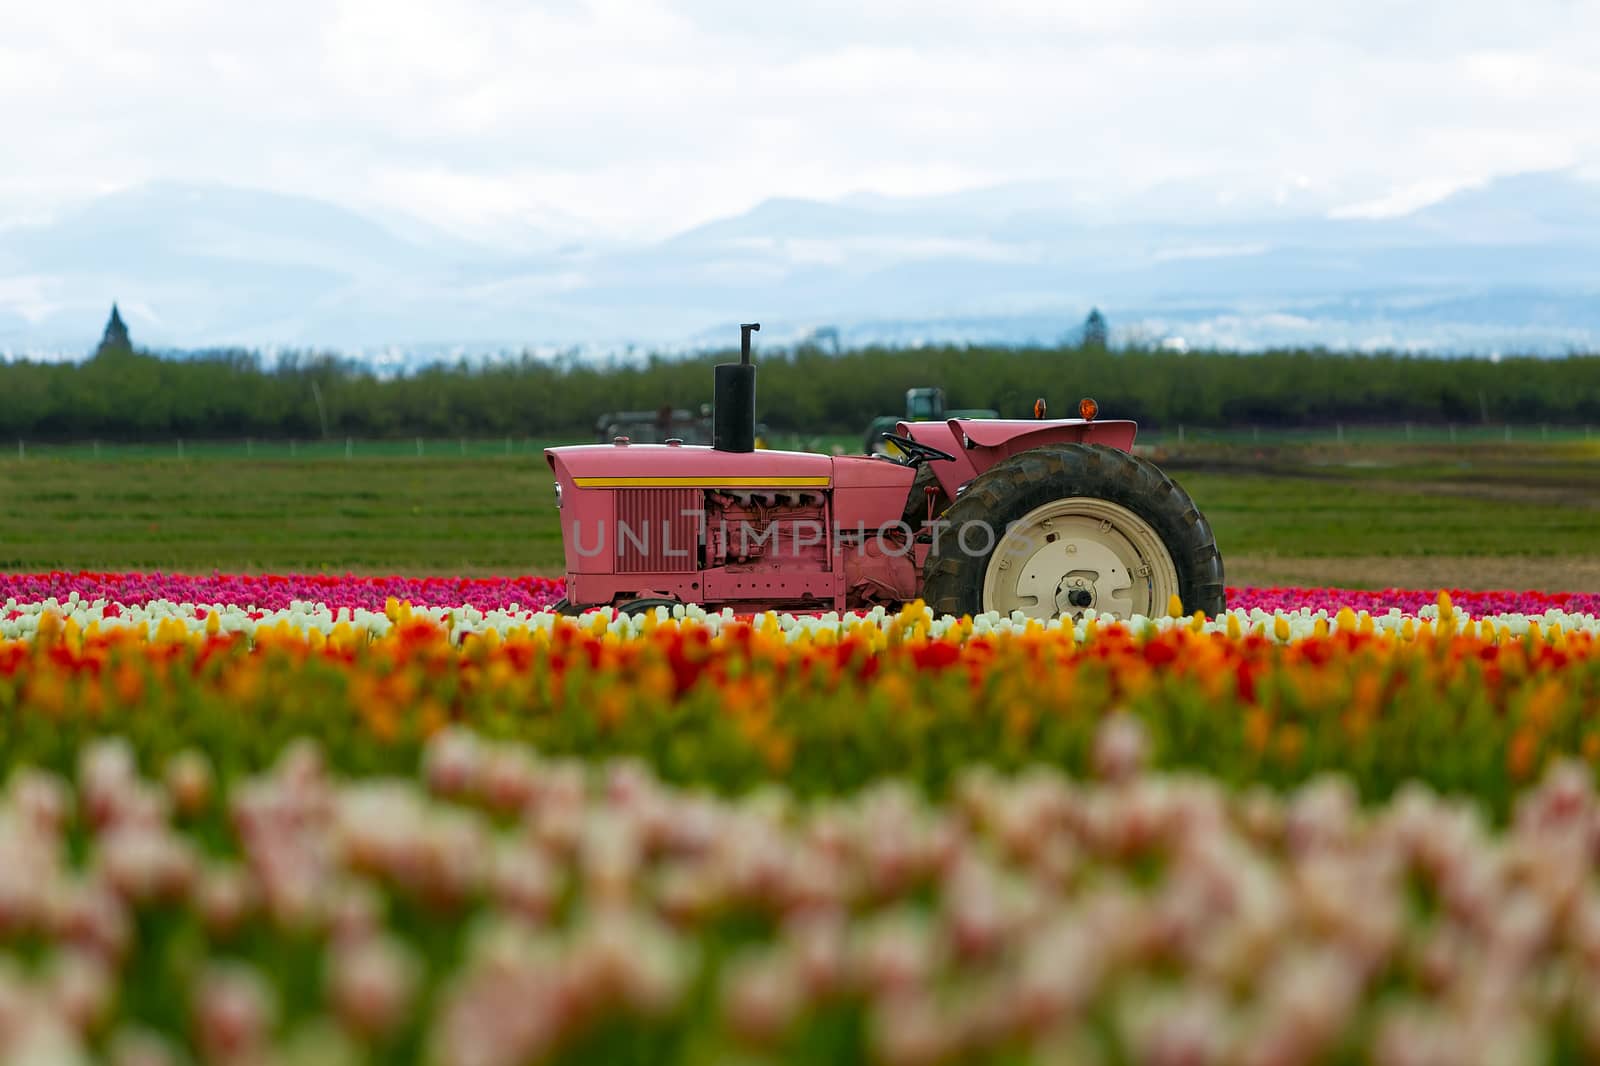 The Pink Tractor by Davidgn